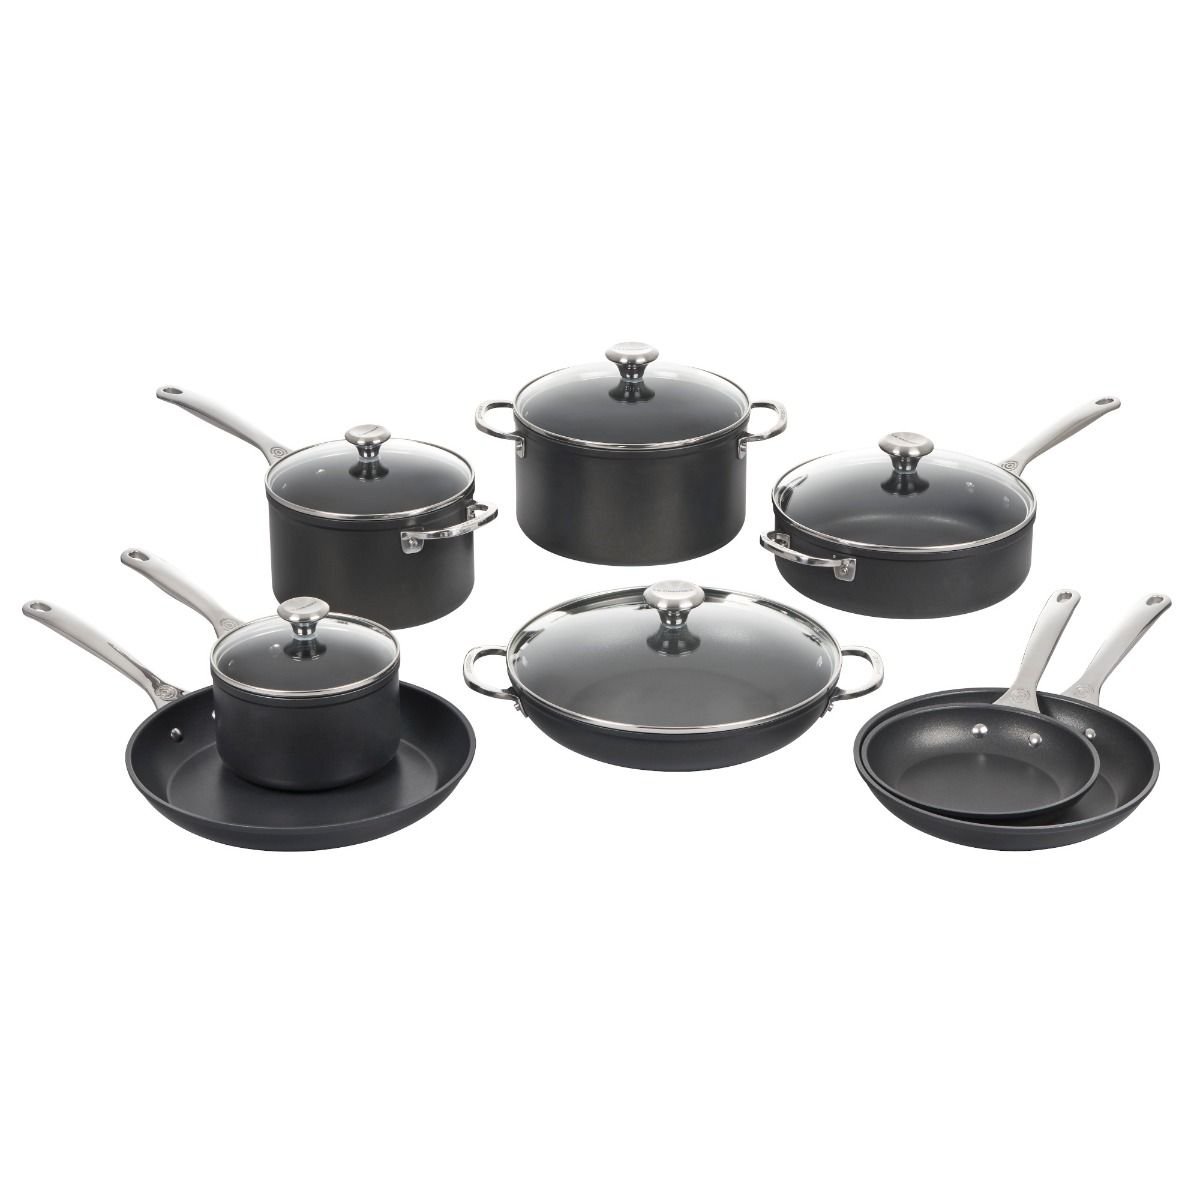 OXO Good Grips Pro Tri Ply Stainless Steel Nonstick Cookware Pots Pans Set  13pc